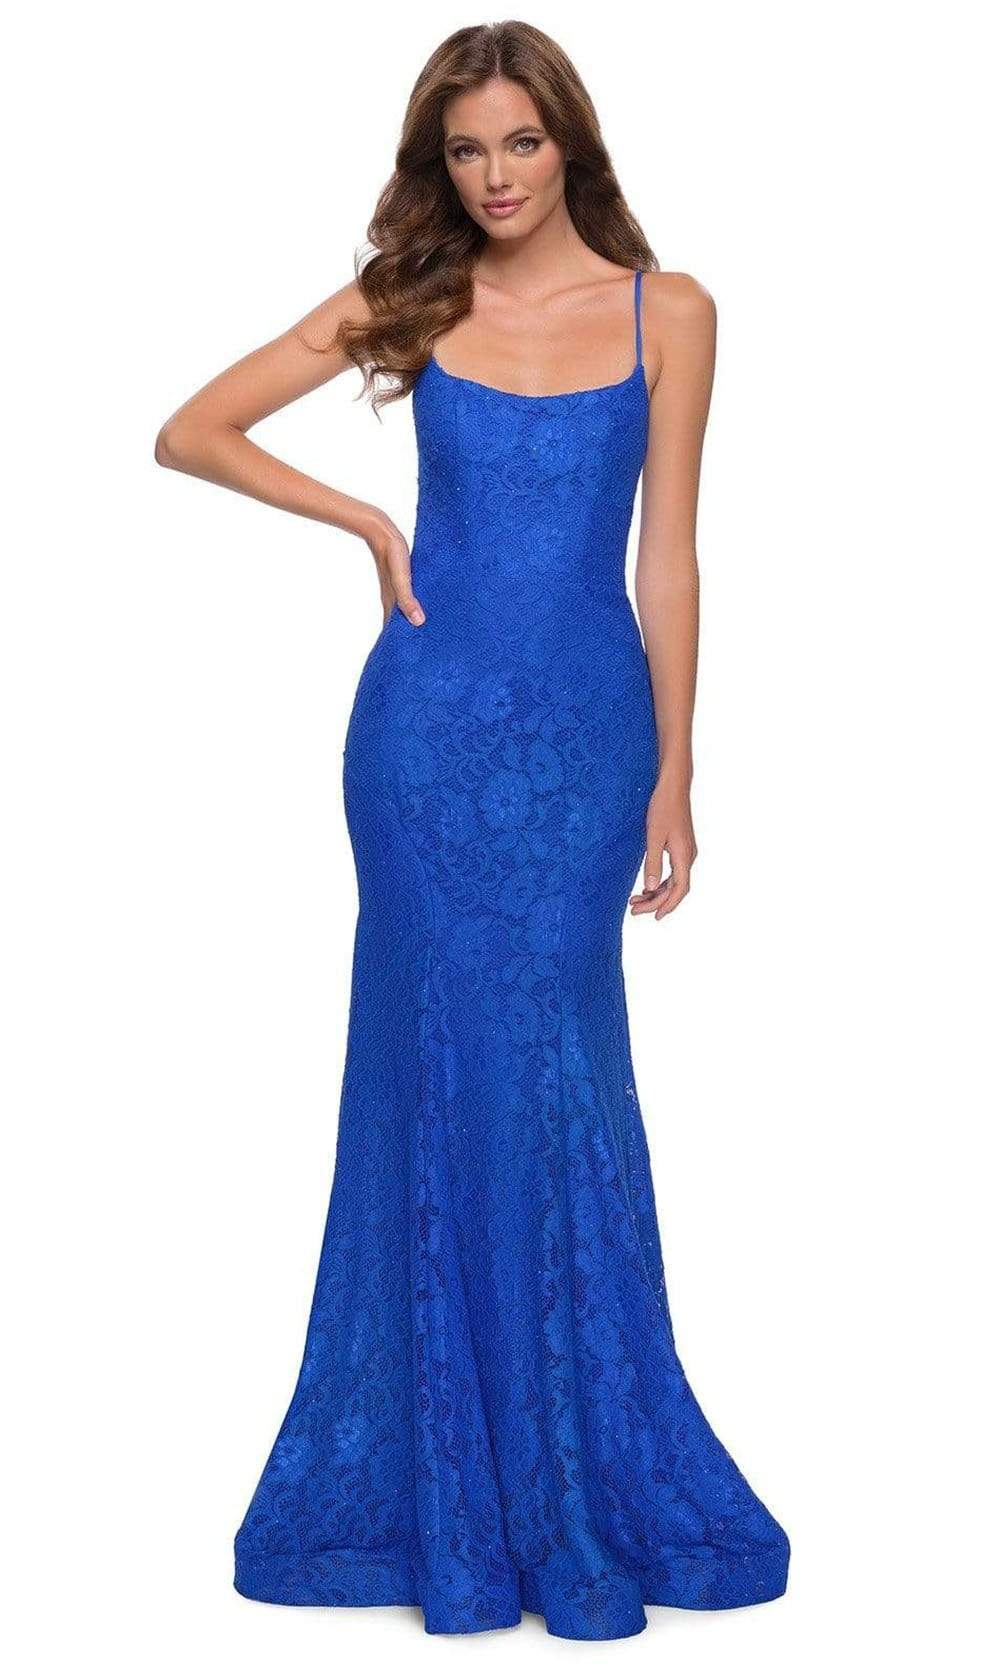 La Femme - 29611 Spaghetti Strap Full Lace Mermaid Gown Special Occasion Dress 00 / Royal Blue